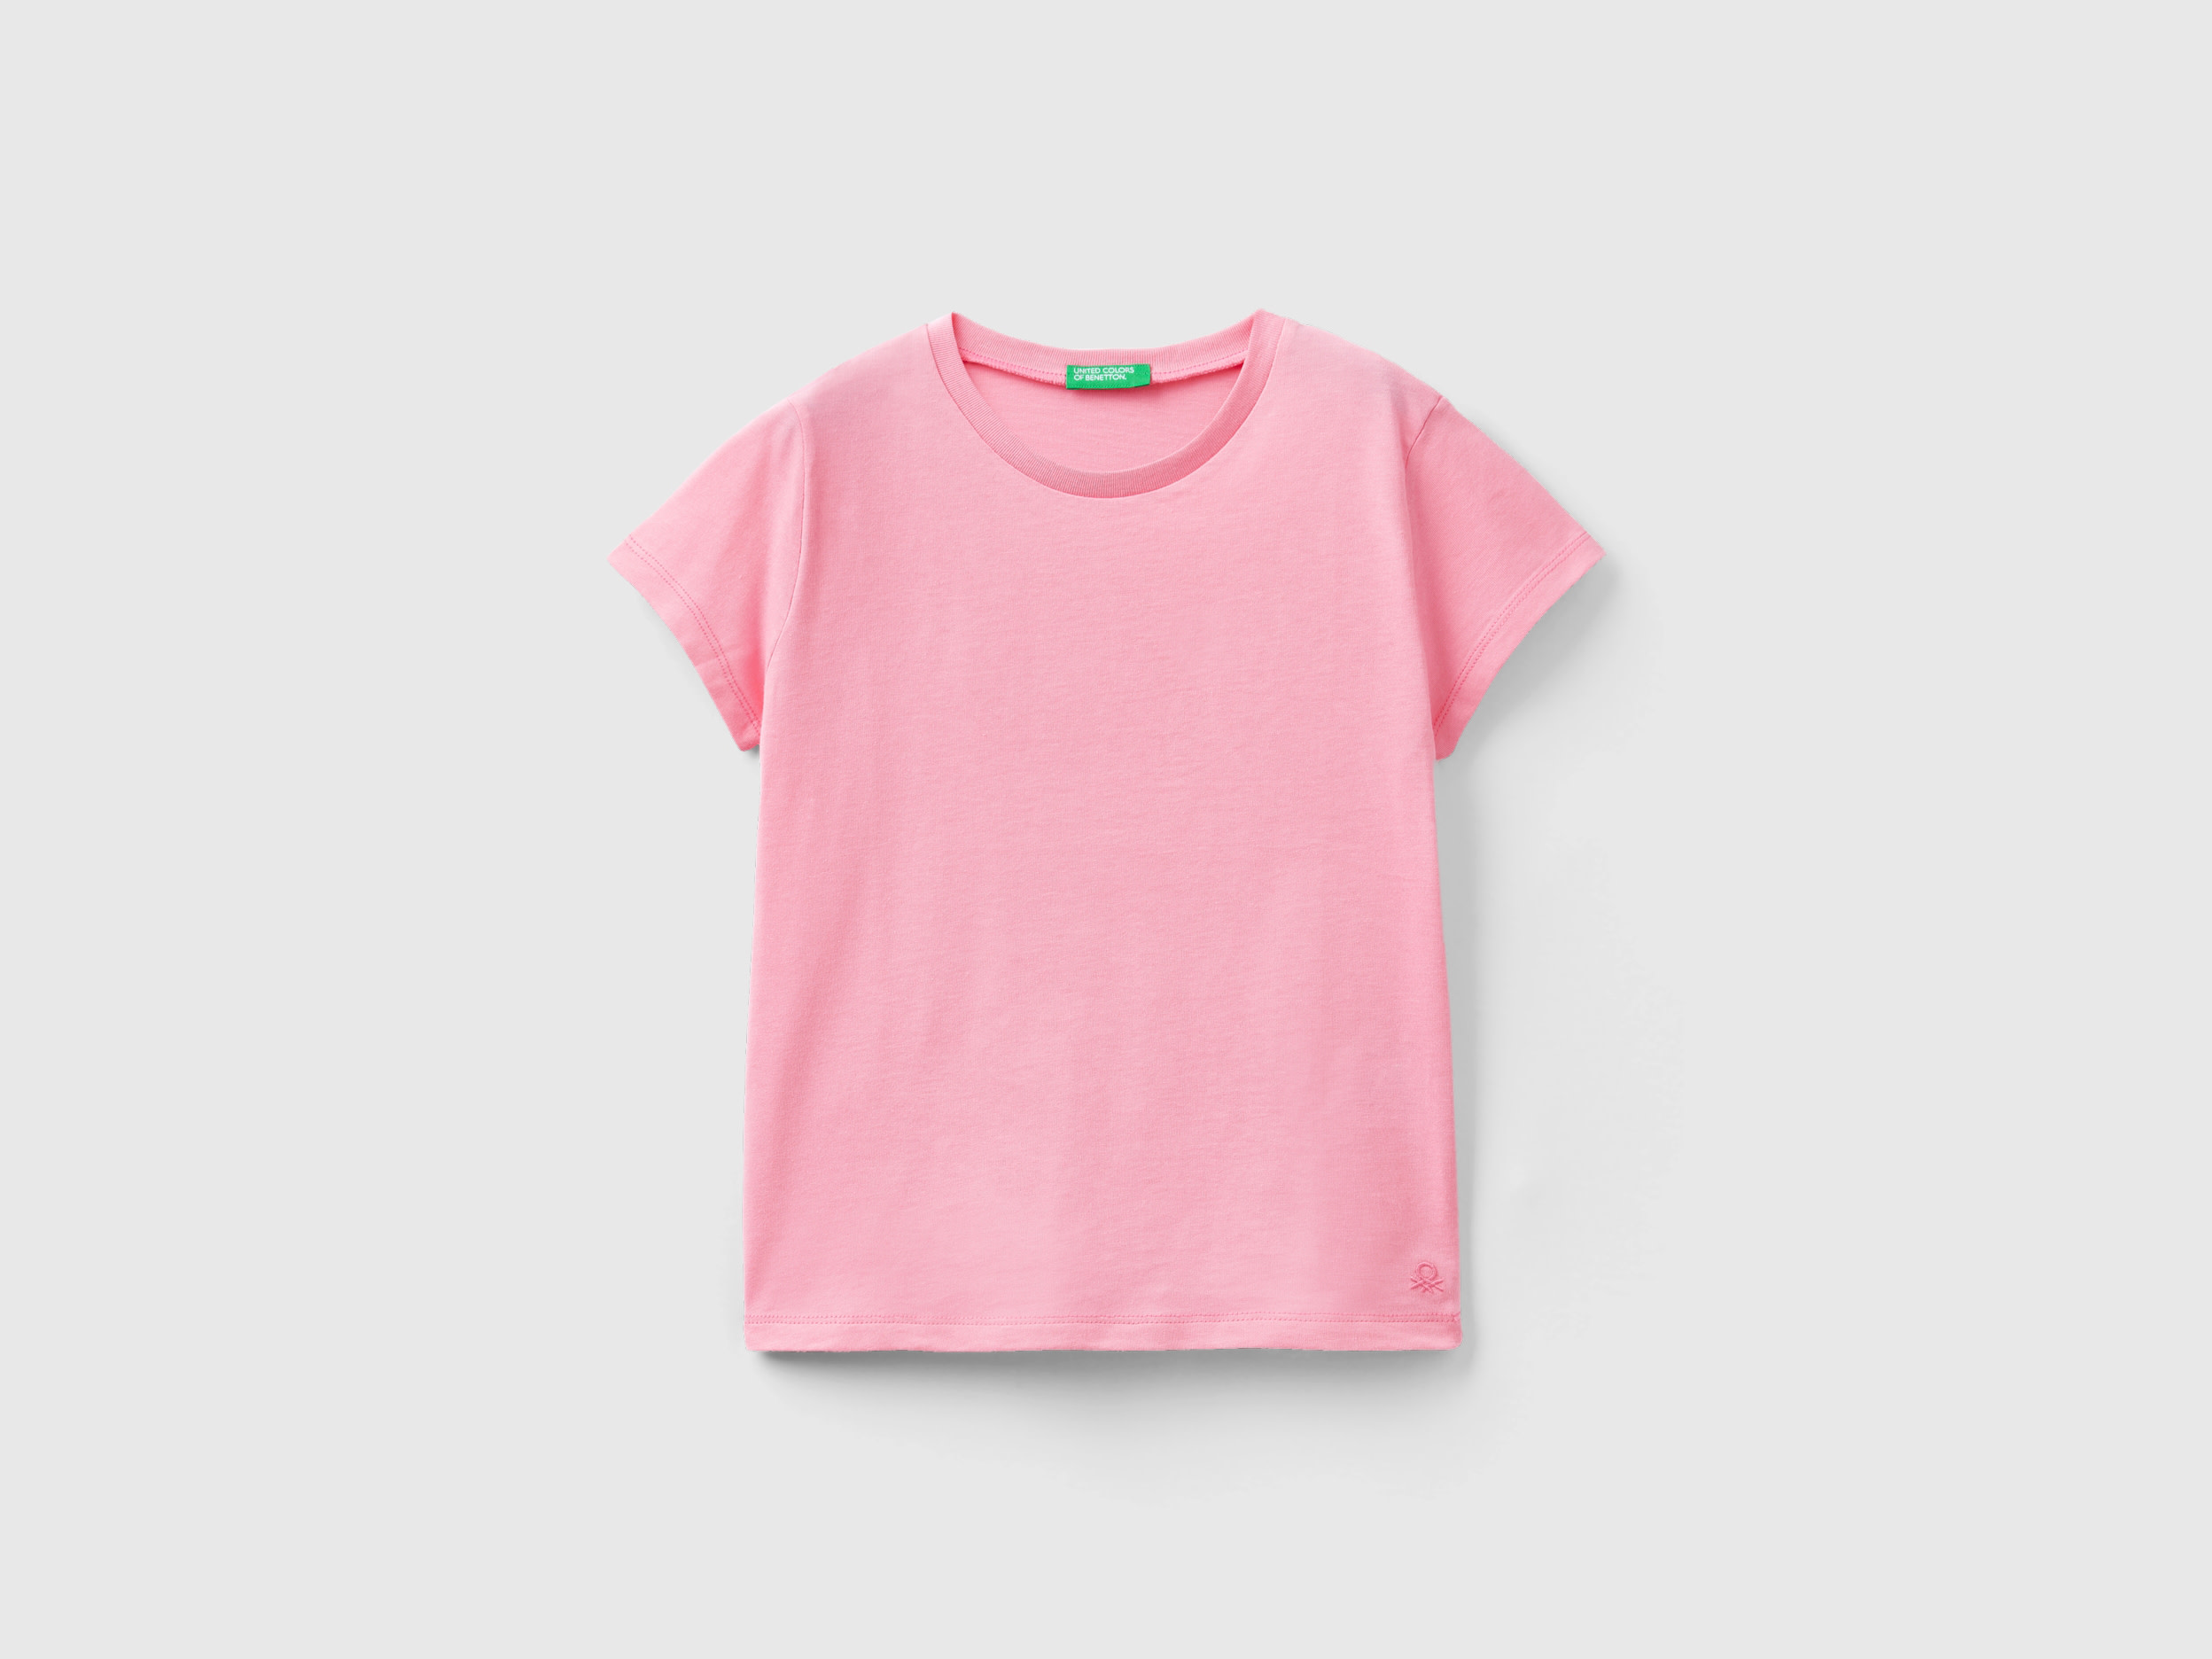 Image of Benetton, T-shirt In Pure Organic Cotton, size L, Pink, Kids